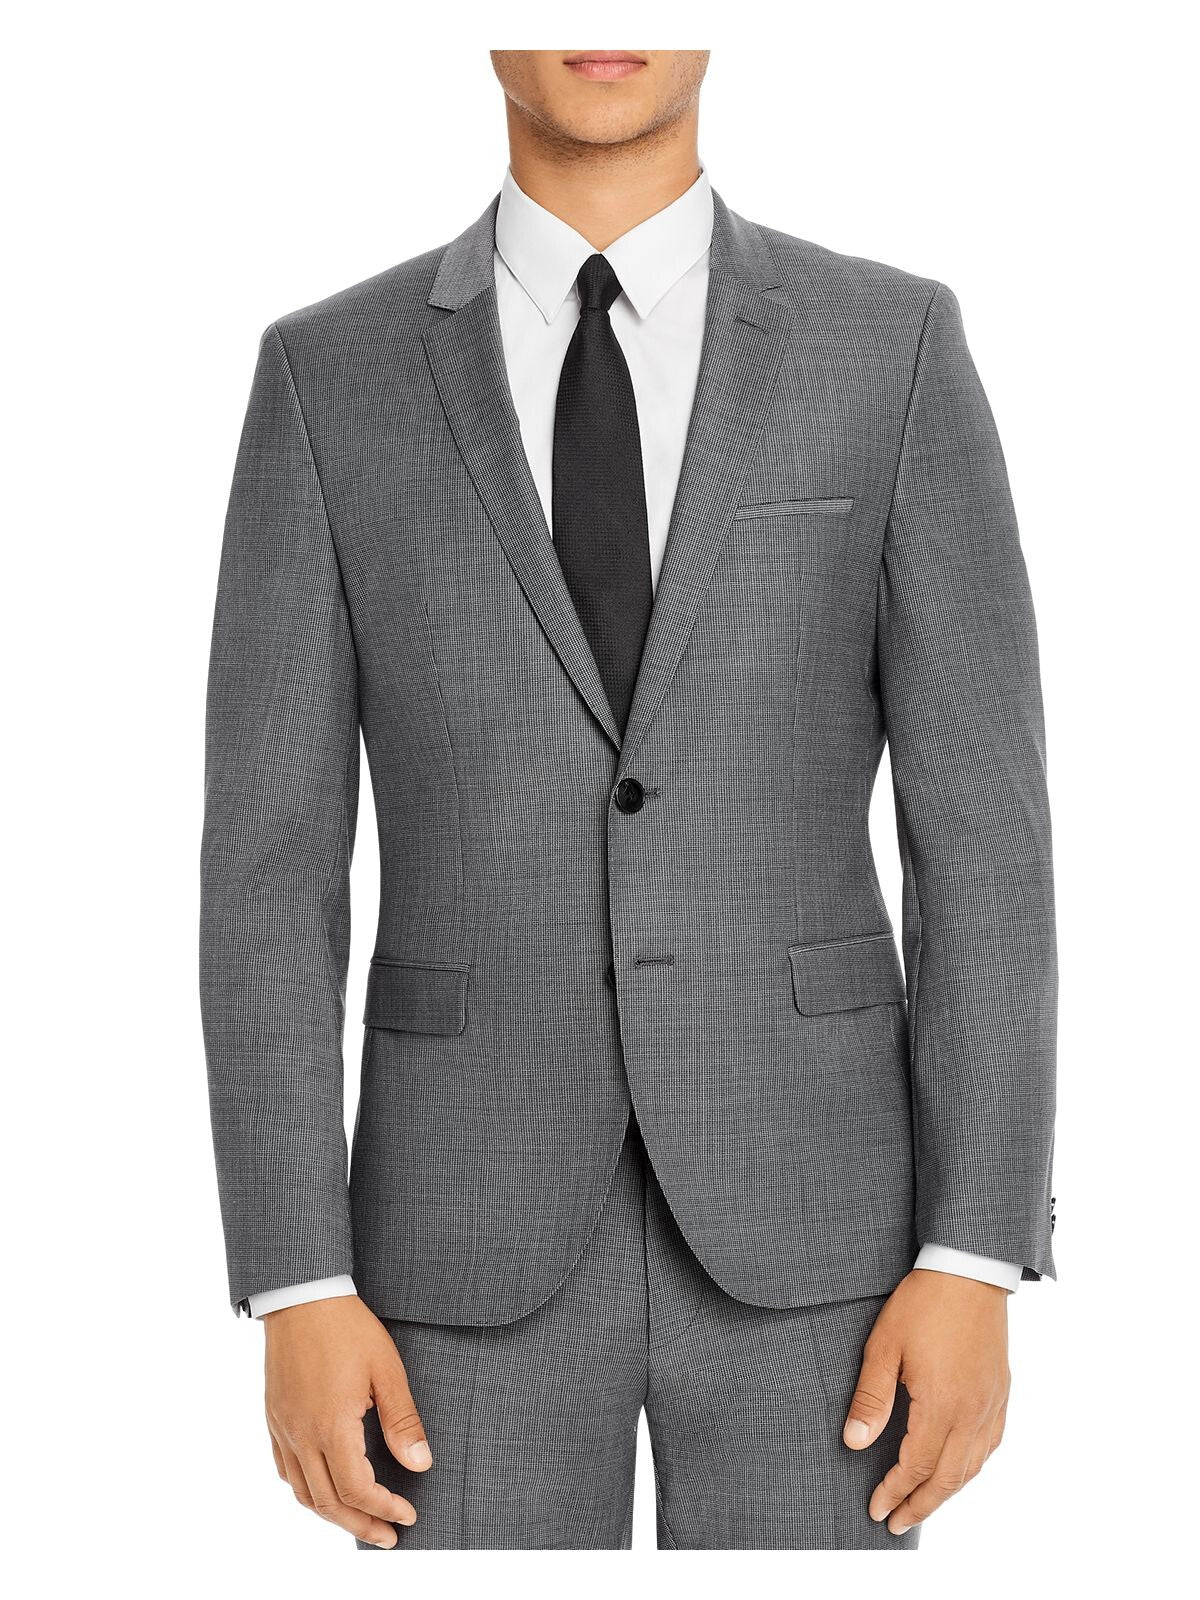 HUGO BOSS Mens Gray Single Breasted, Stretch, Extra Slim Fit Suit Separate Blazer Jacket 38R